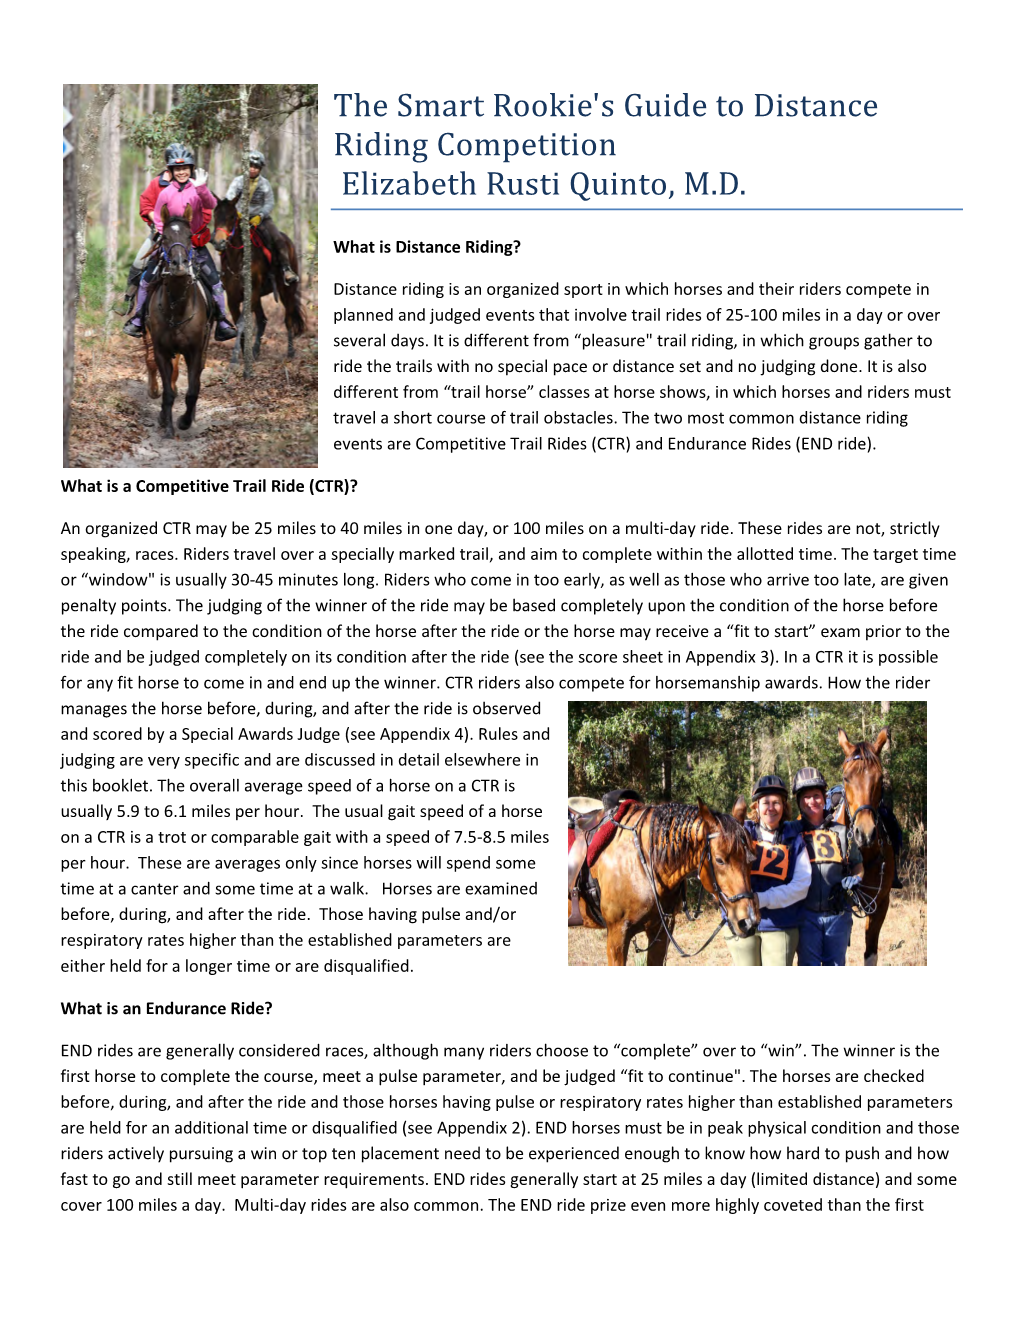 The Smart Rookie's Guide to Distance Riding Competition Elizabeth Rusti Quinto, M.D